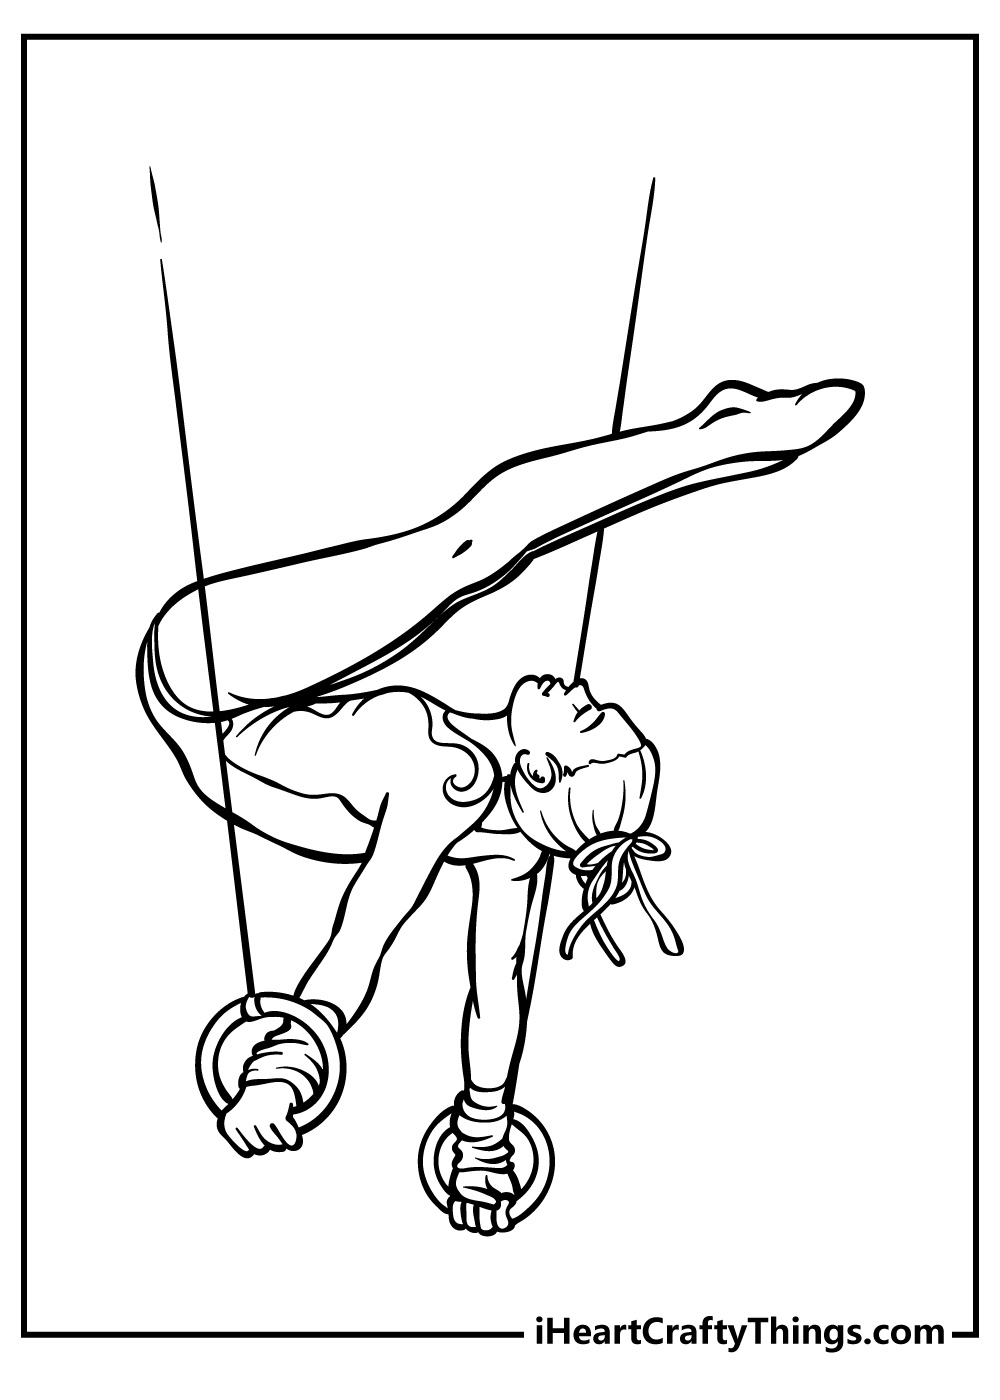 Gymnastics Coloring Book for adults free download